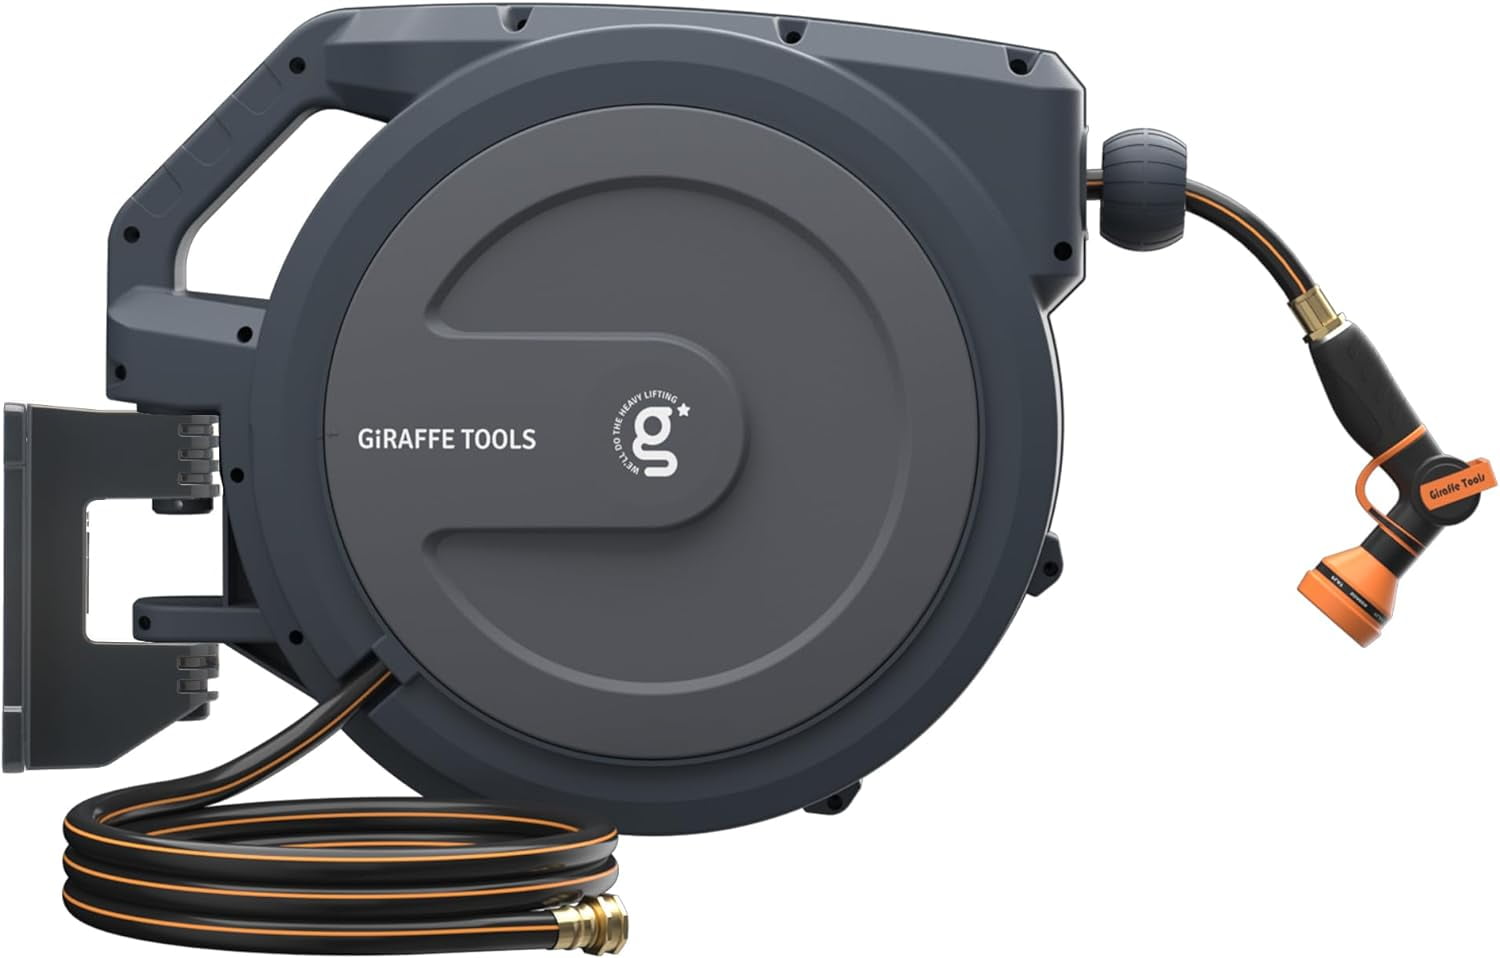 Giraffe Tools AW30 Garden Hose Reel Retractable 1/2 x 100 ft Wall Mounted Water  Hose Reel Automatic Rewind, Any Length Lock, 100ft, Dark Grey 